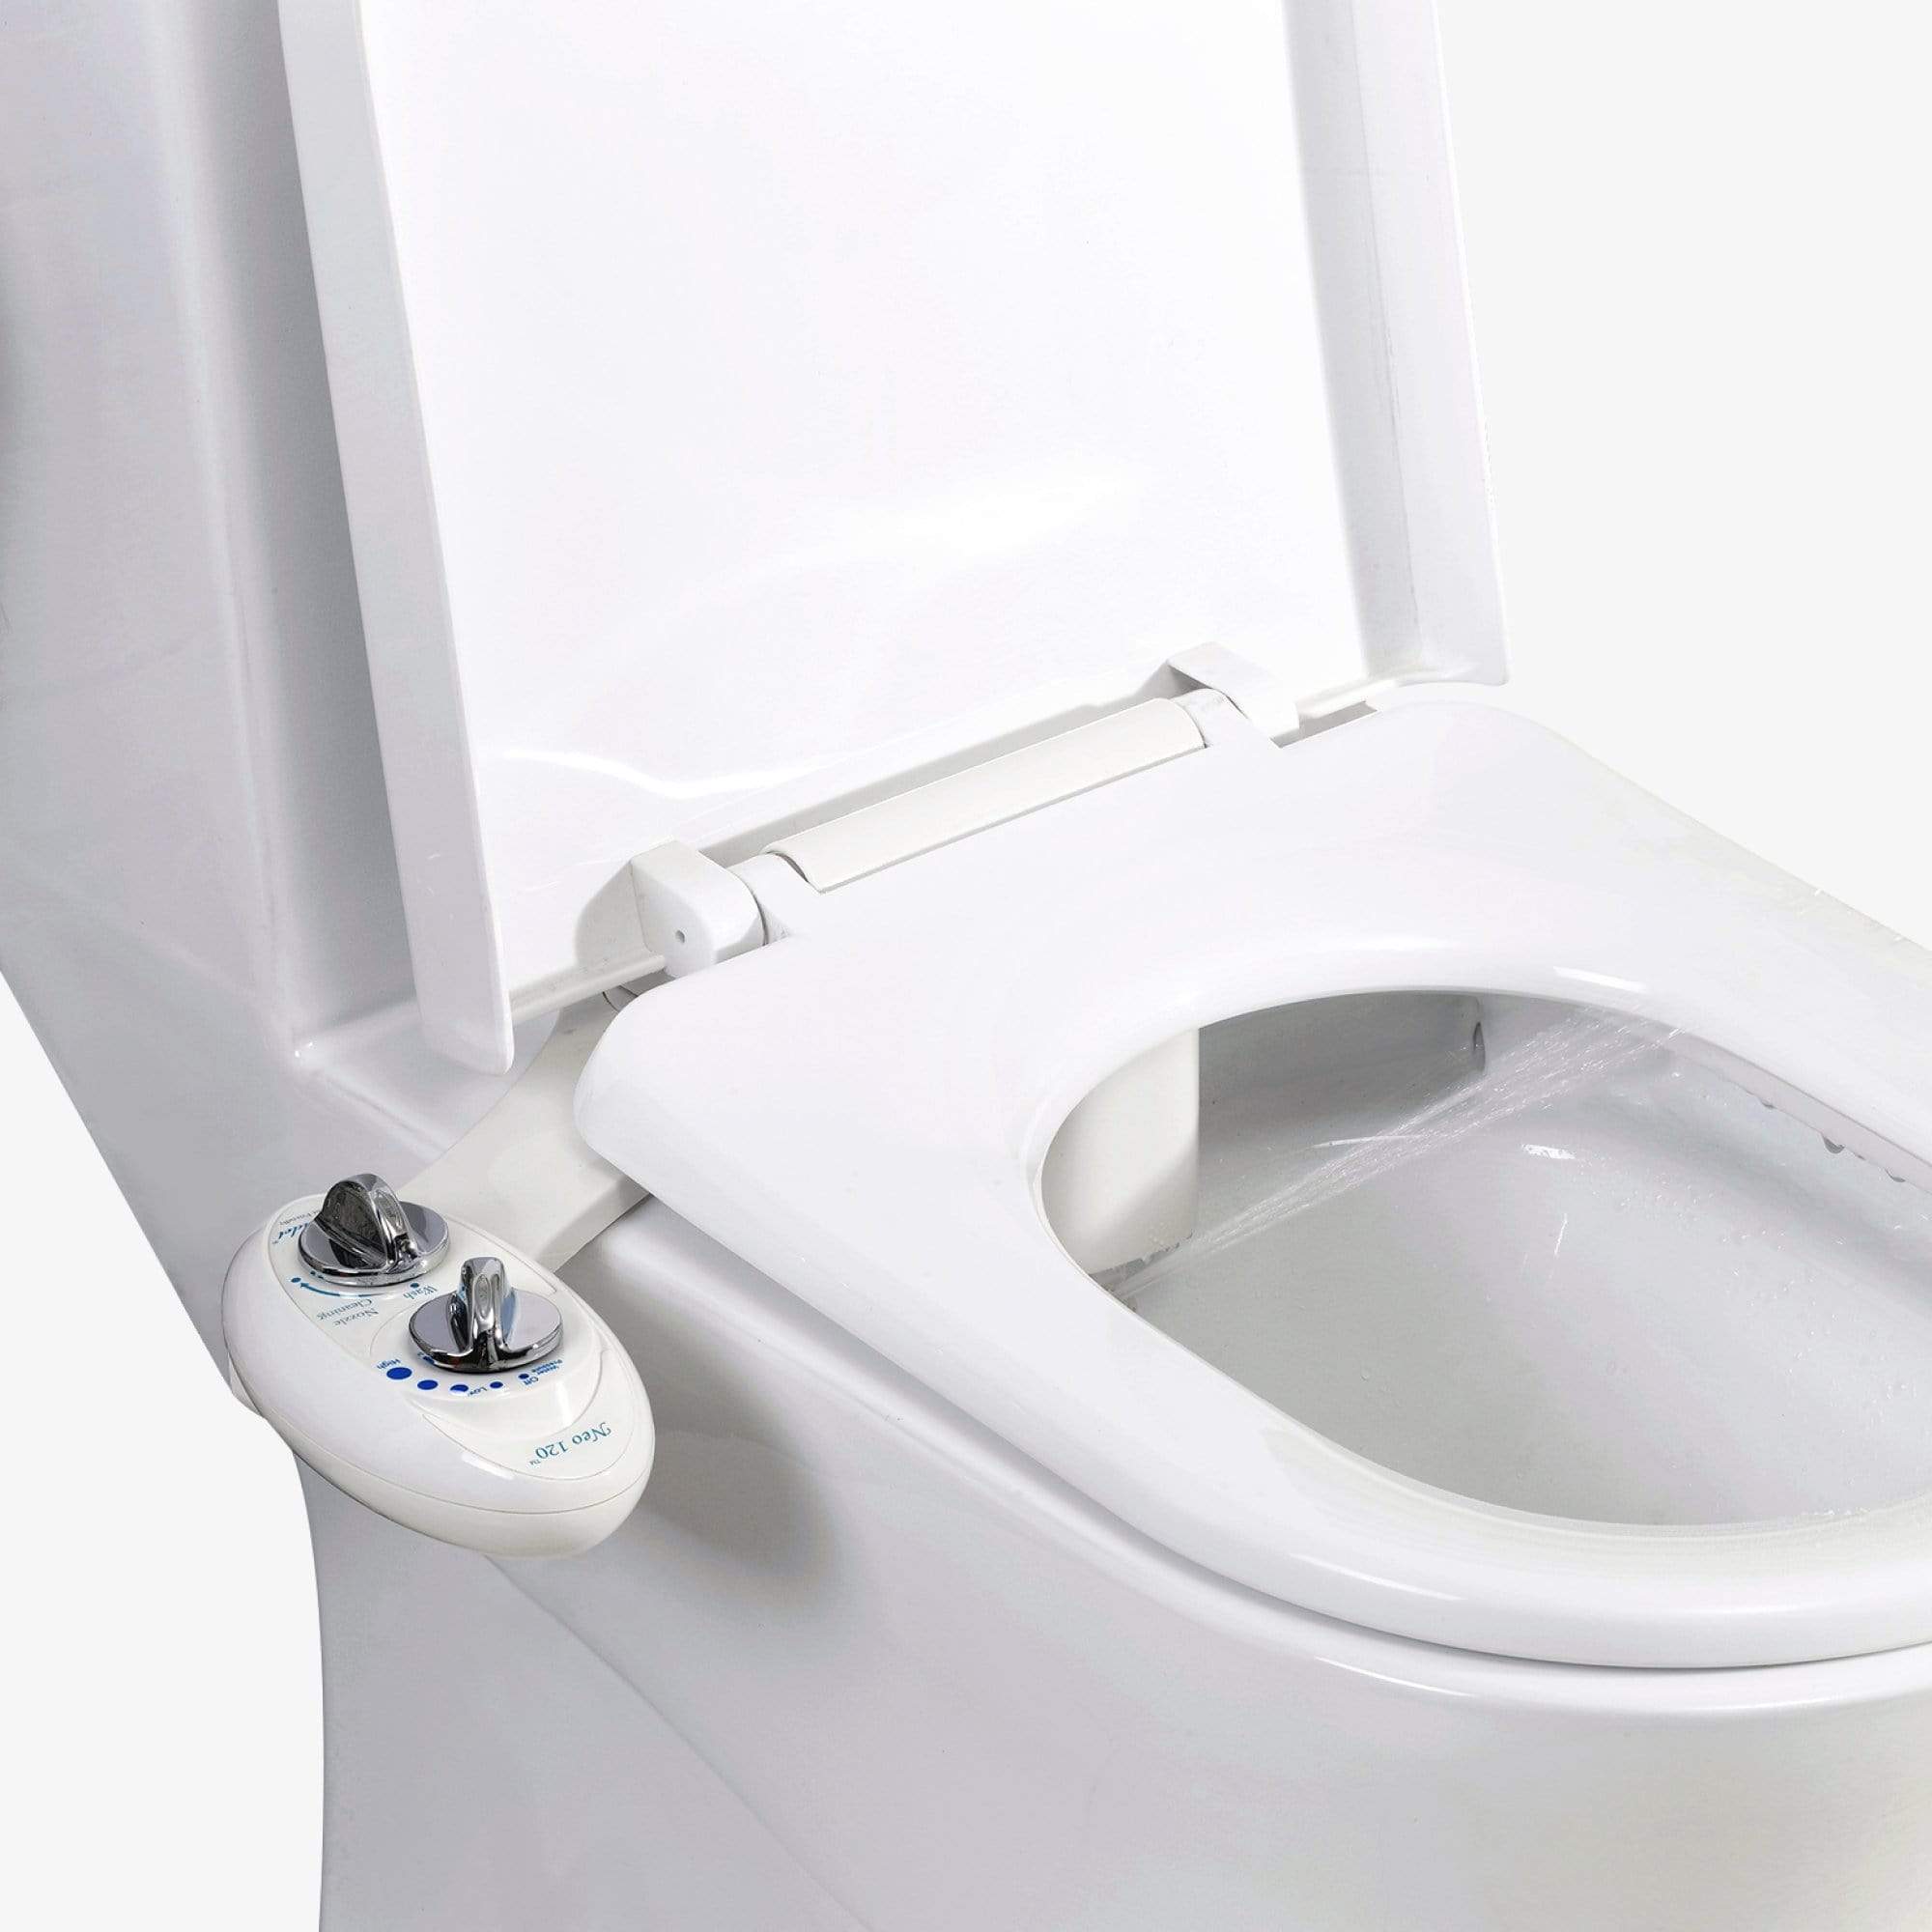 NEO 120: Imperfect Packaging - NEO 120 White installed on a toilet with water spraying from nozzles